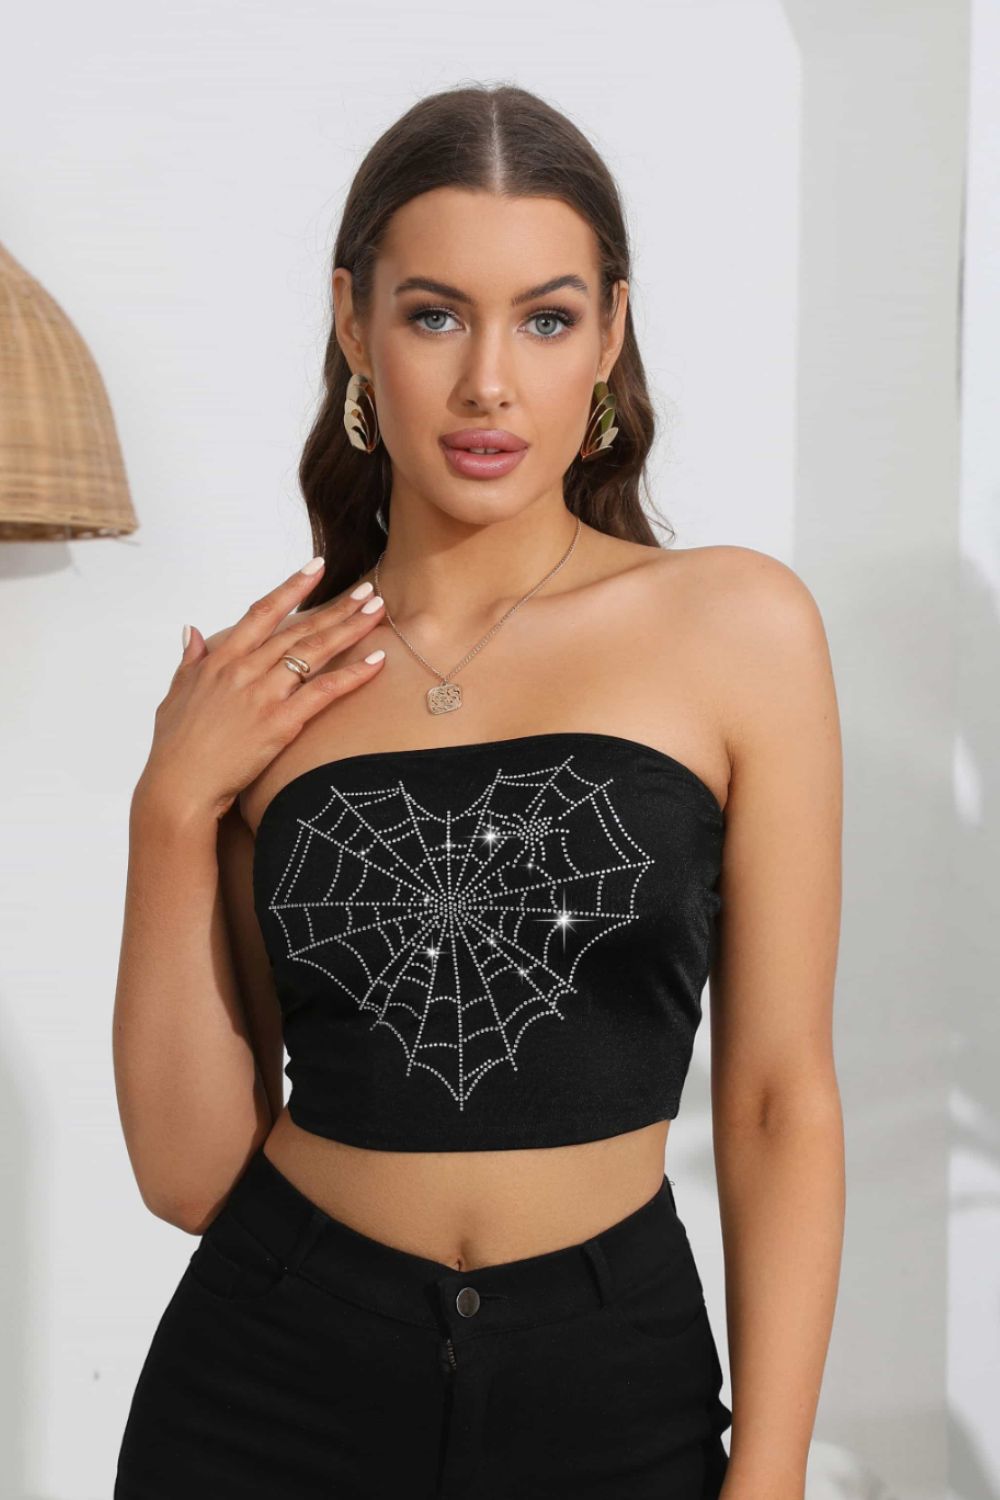 LADIES—TOP—Heart Spider Web Graphic Tube Top